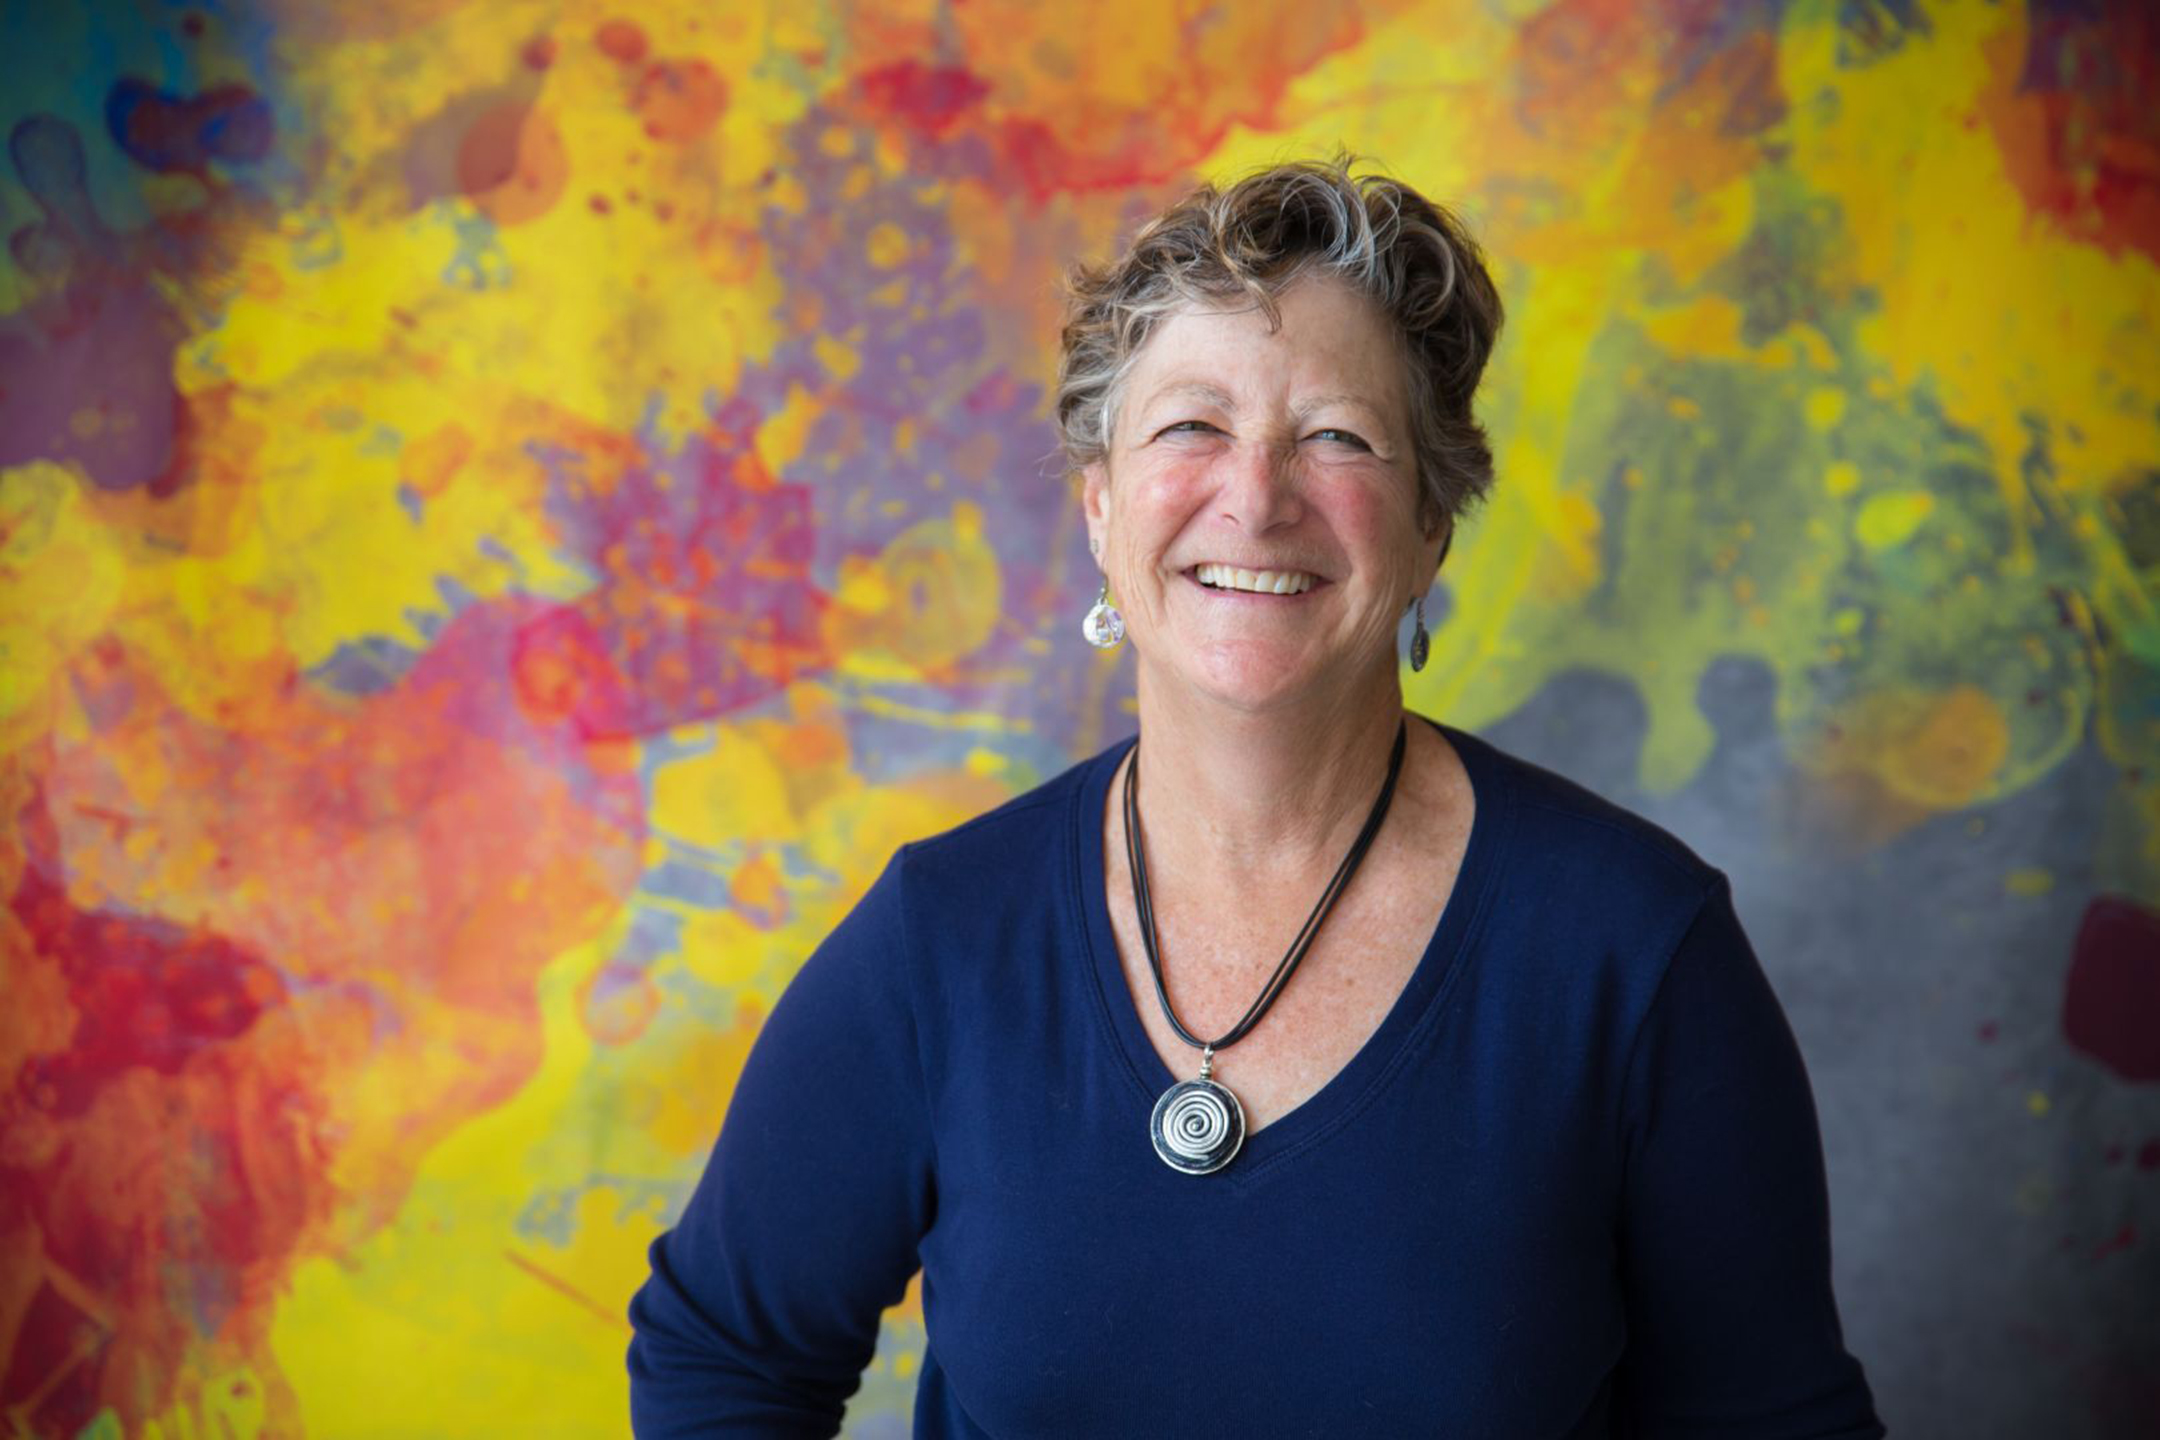 woman smiling at the camera against a colorful background painting